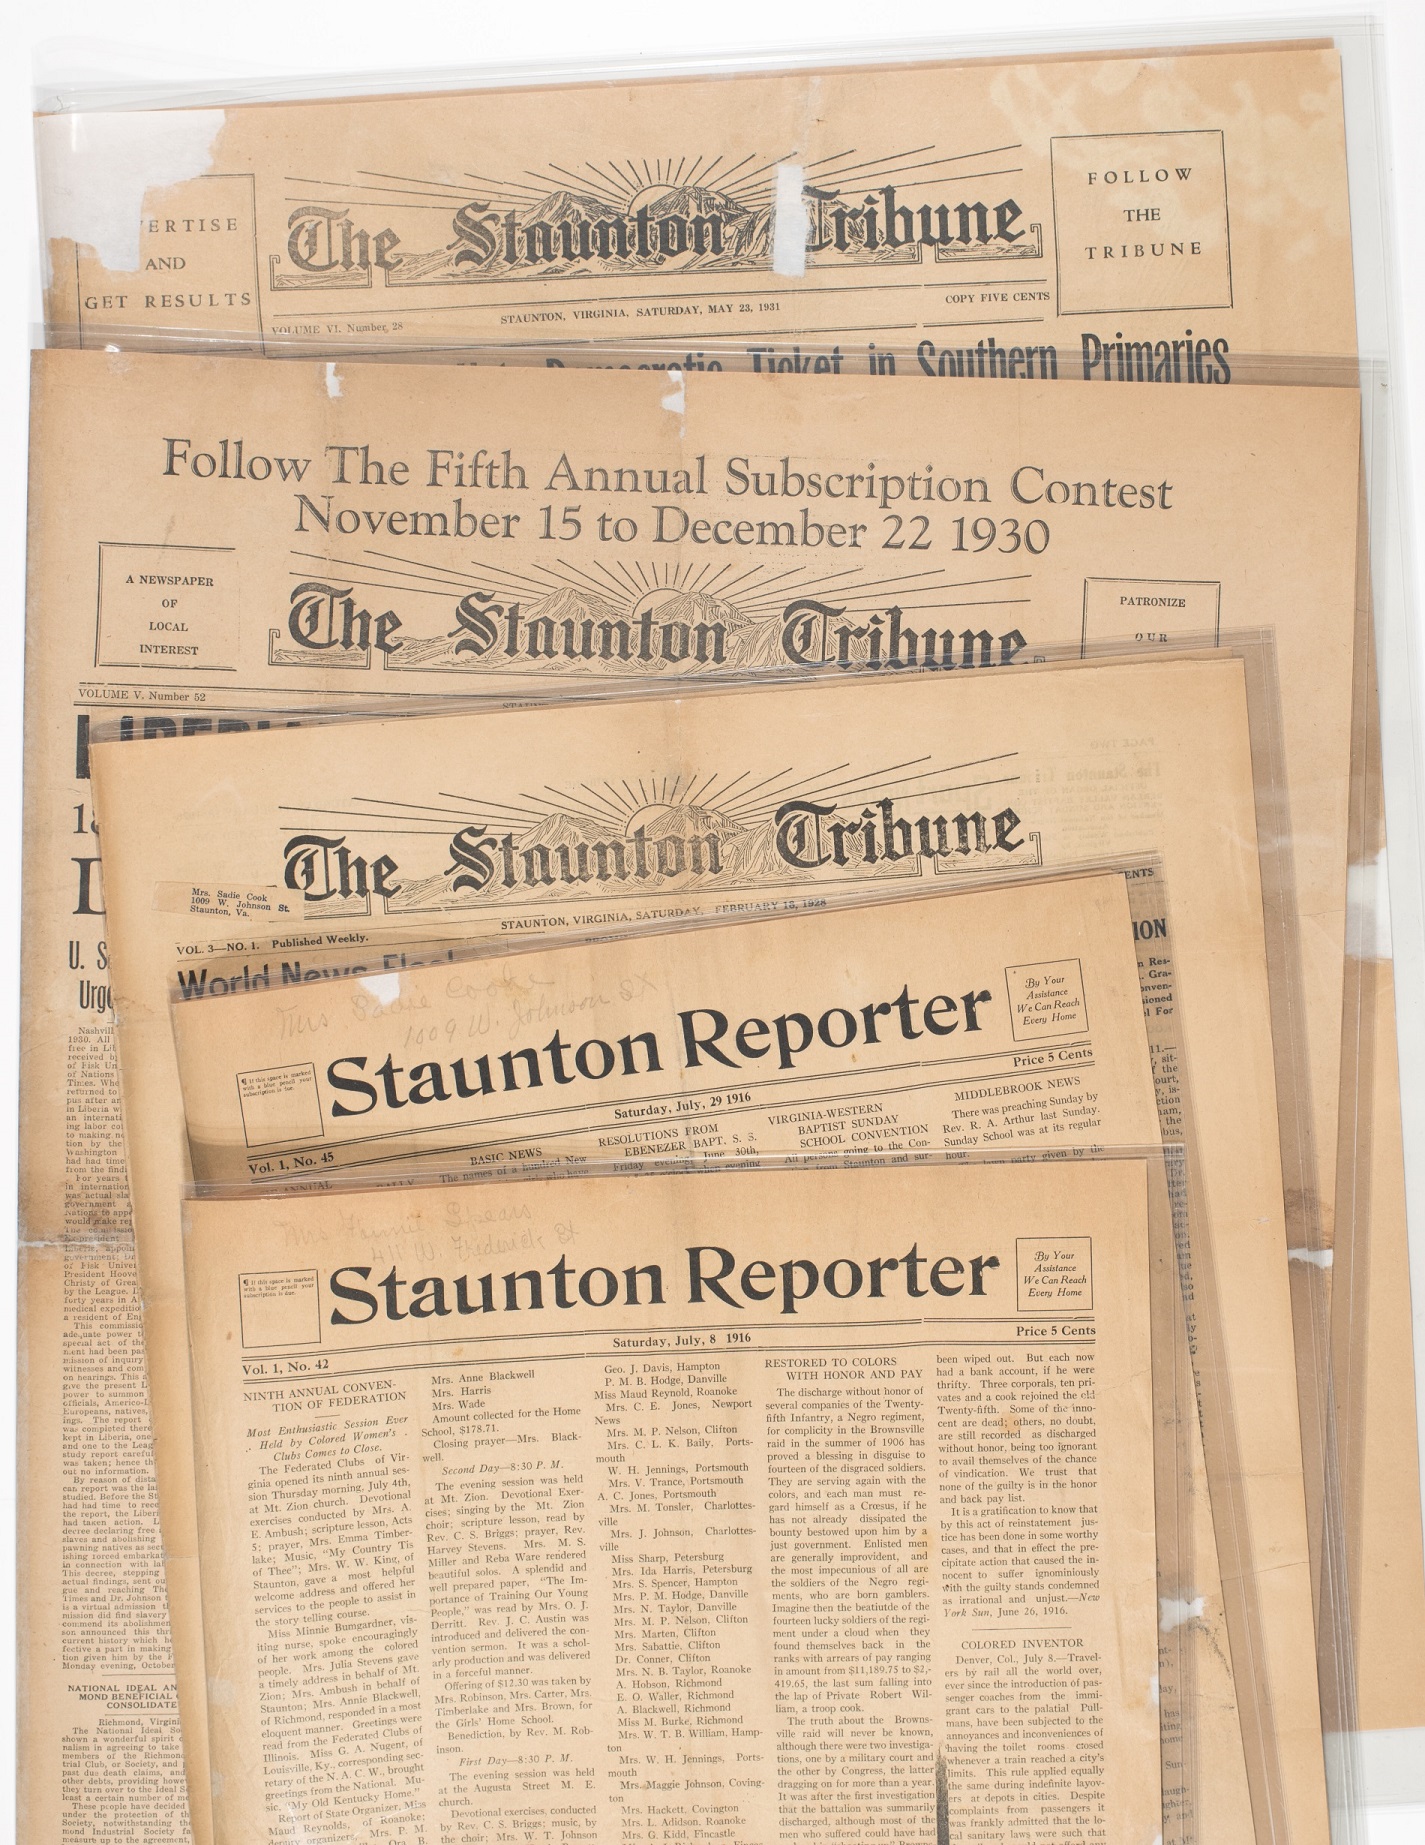 Before & After: The Staunton Tribune and Staunton Reporter